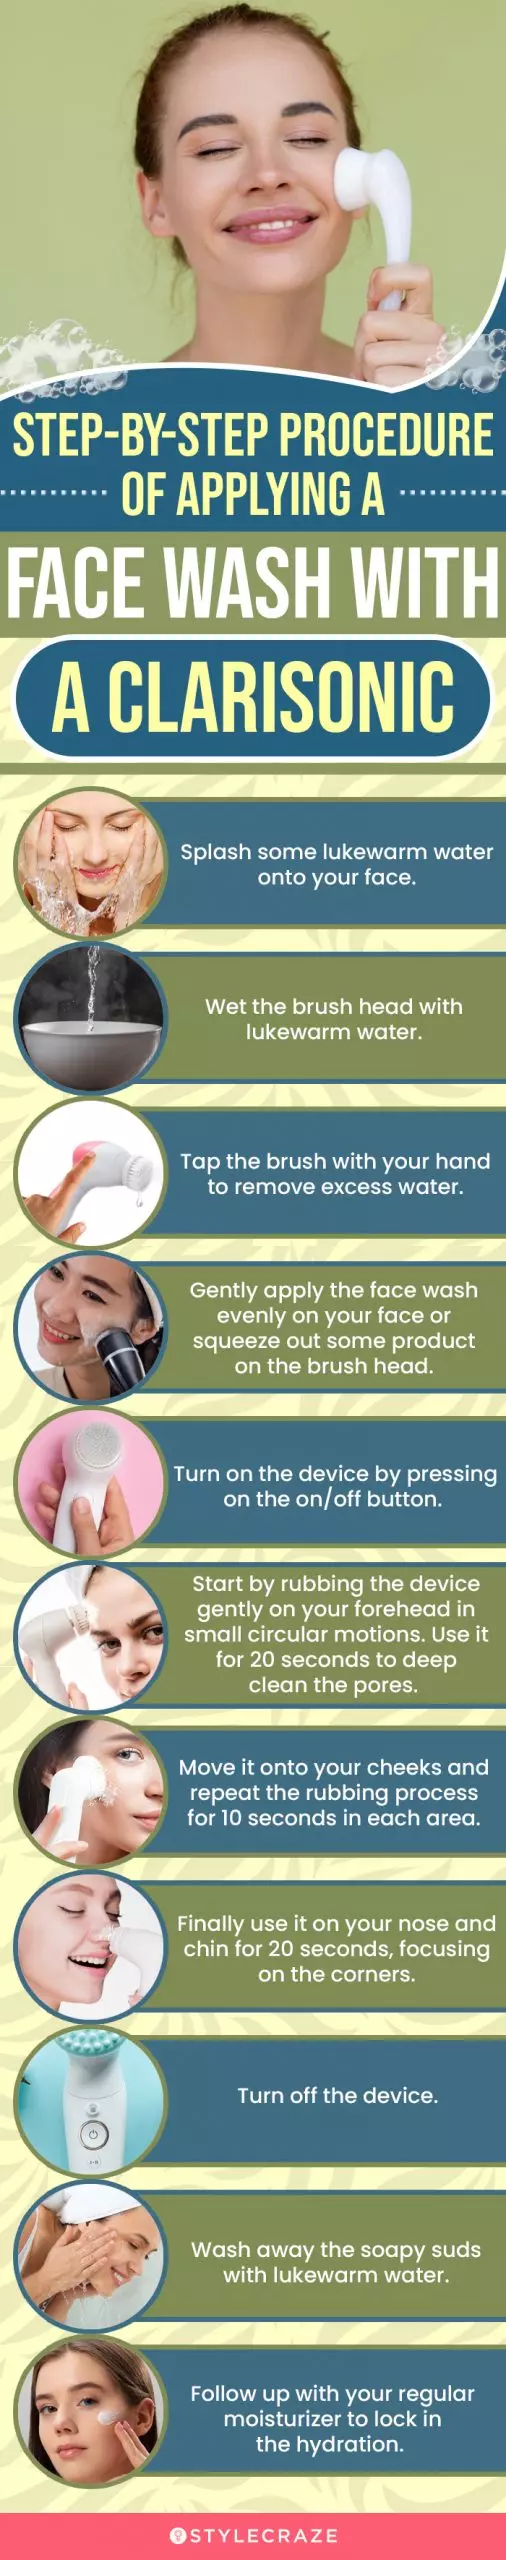 Step-By-Step Procedure Of Applying A Face Wash With A Clarisonic (infographic)